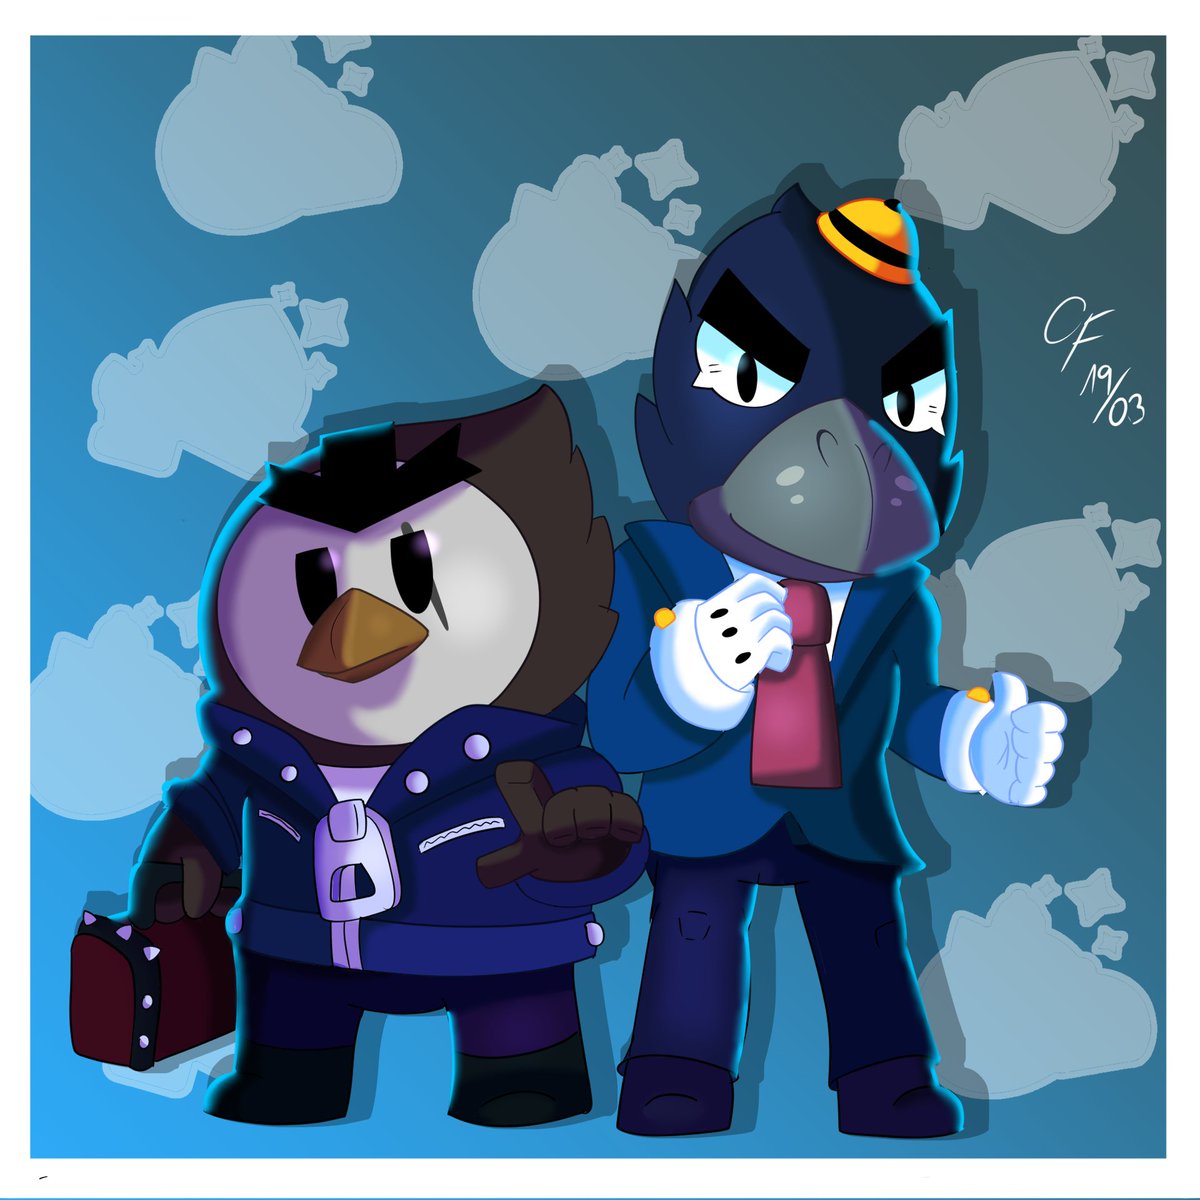 Crow & MrP but they swapped roles! #BrawlStars #BrawlStarsArt #brawlstarsfanart #brawlstarsmrp #brawlstarscrow